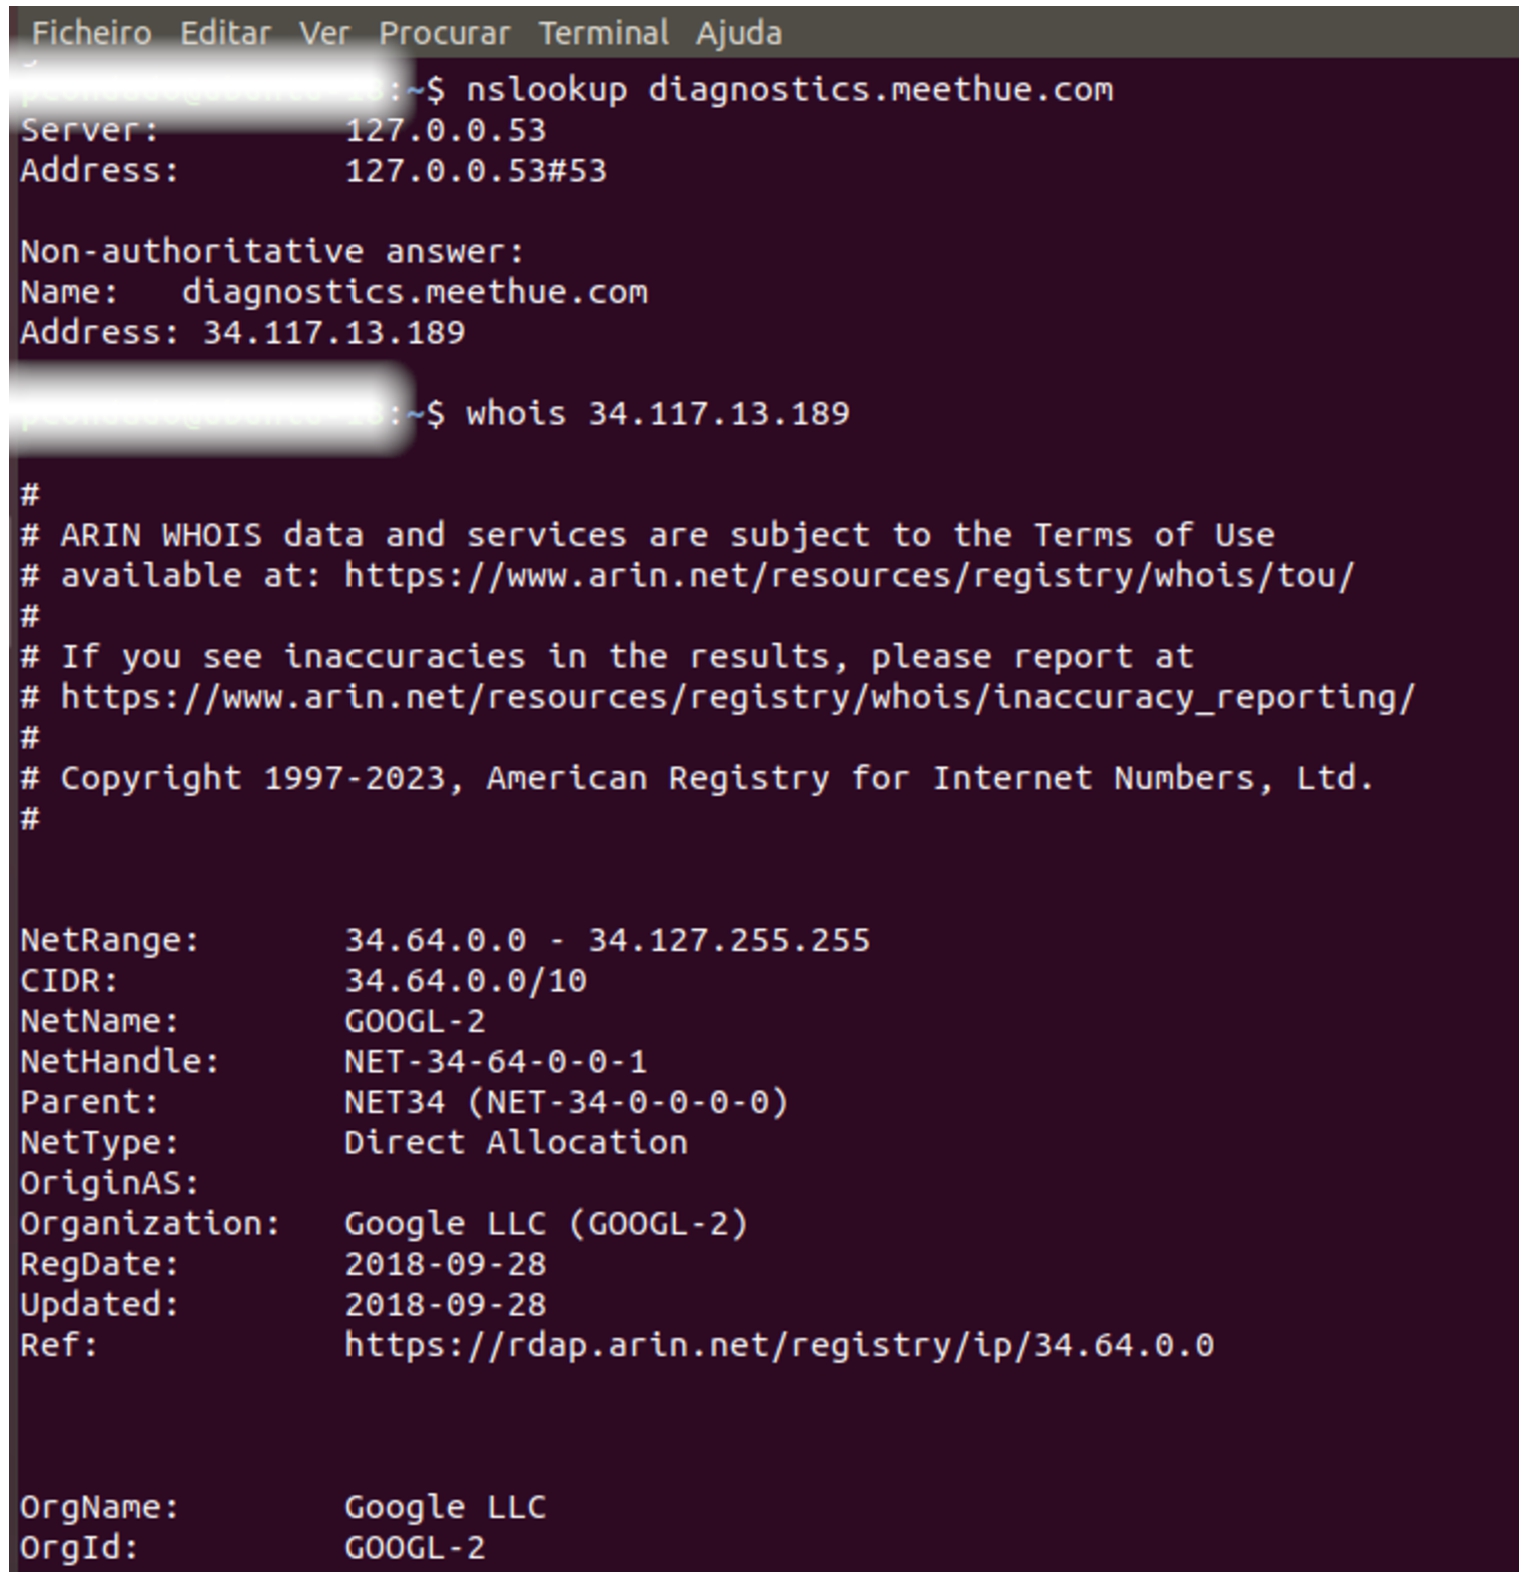 Using nslookup and whois commands in a Linux shell.